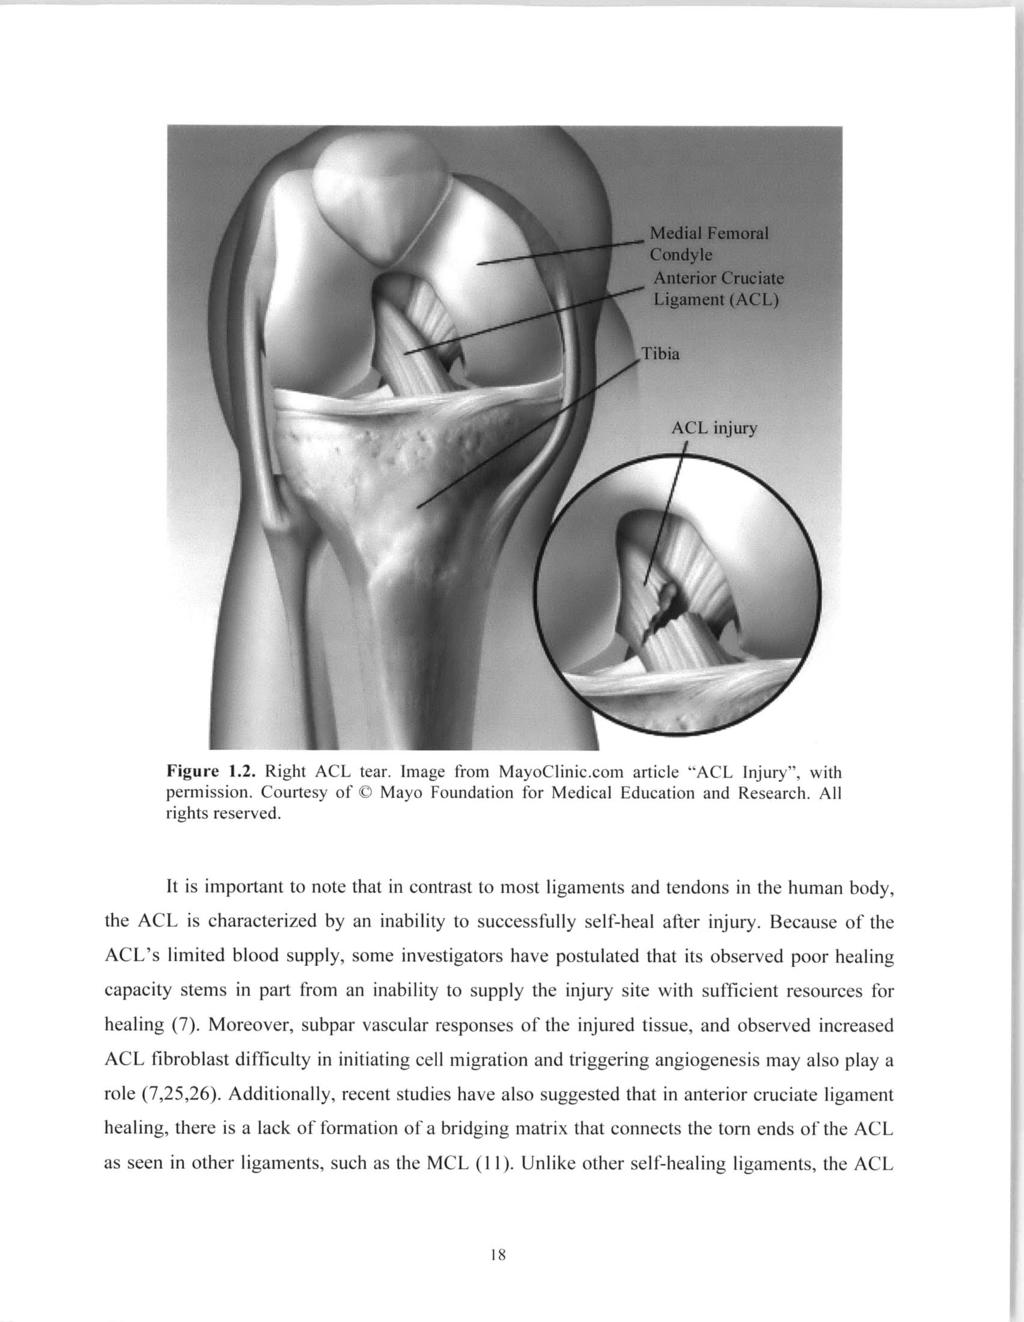 Figure 1.2. Right ACL tear. Image from MayoClinic.com article "ACL Injury", with permission. Courtesy of 0 Mayo Foundation for Medical Education and Research. All rights reserved.